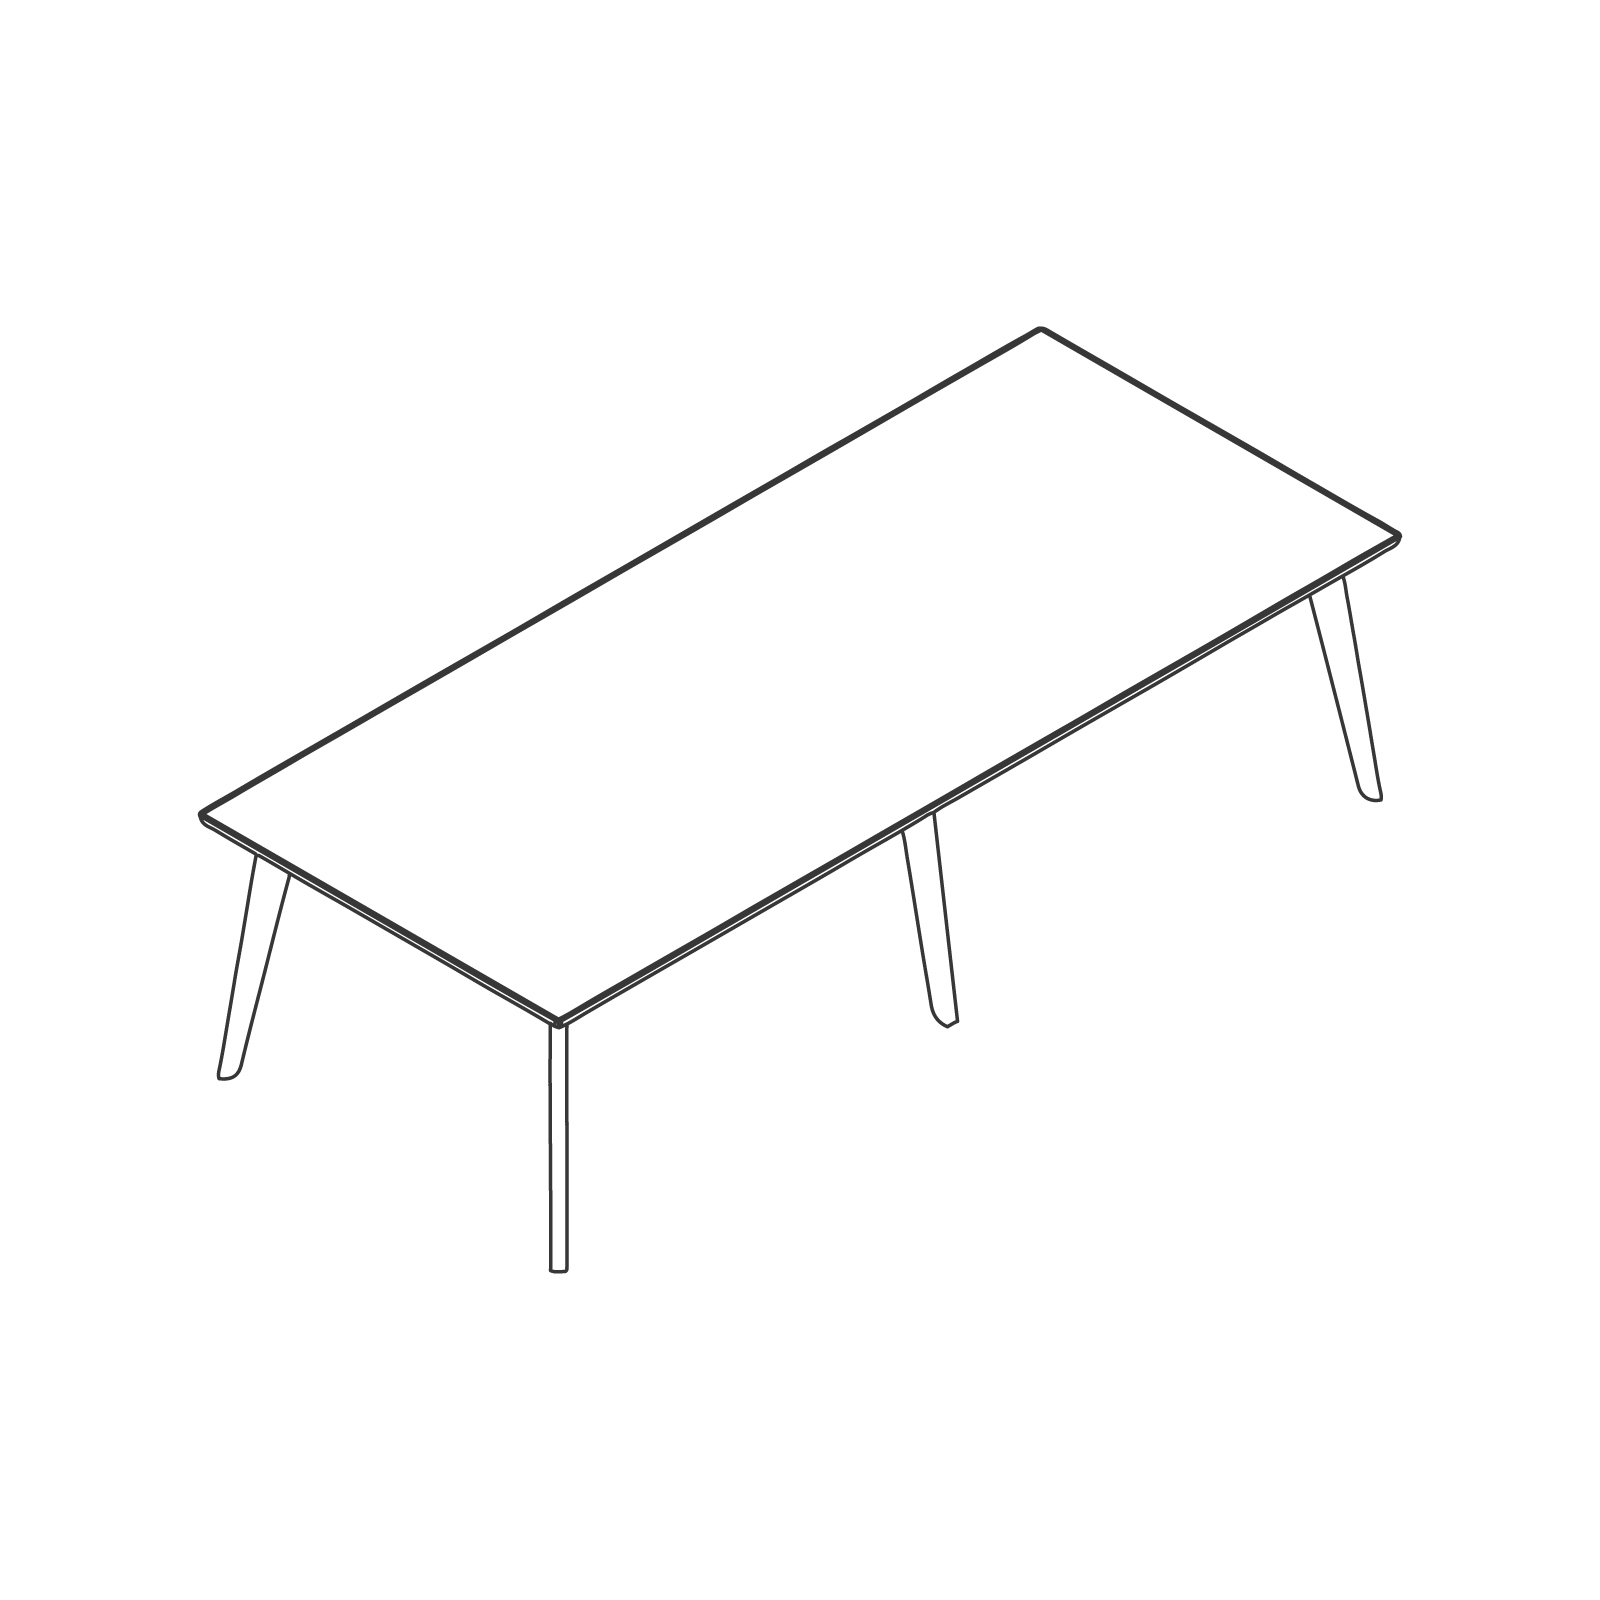 A line drawing of Dalby Conference Table–Rectangular–6 Leg.